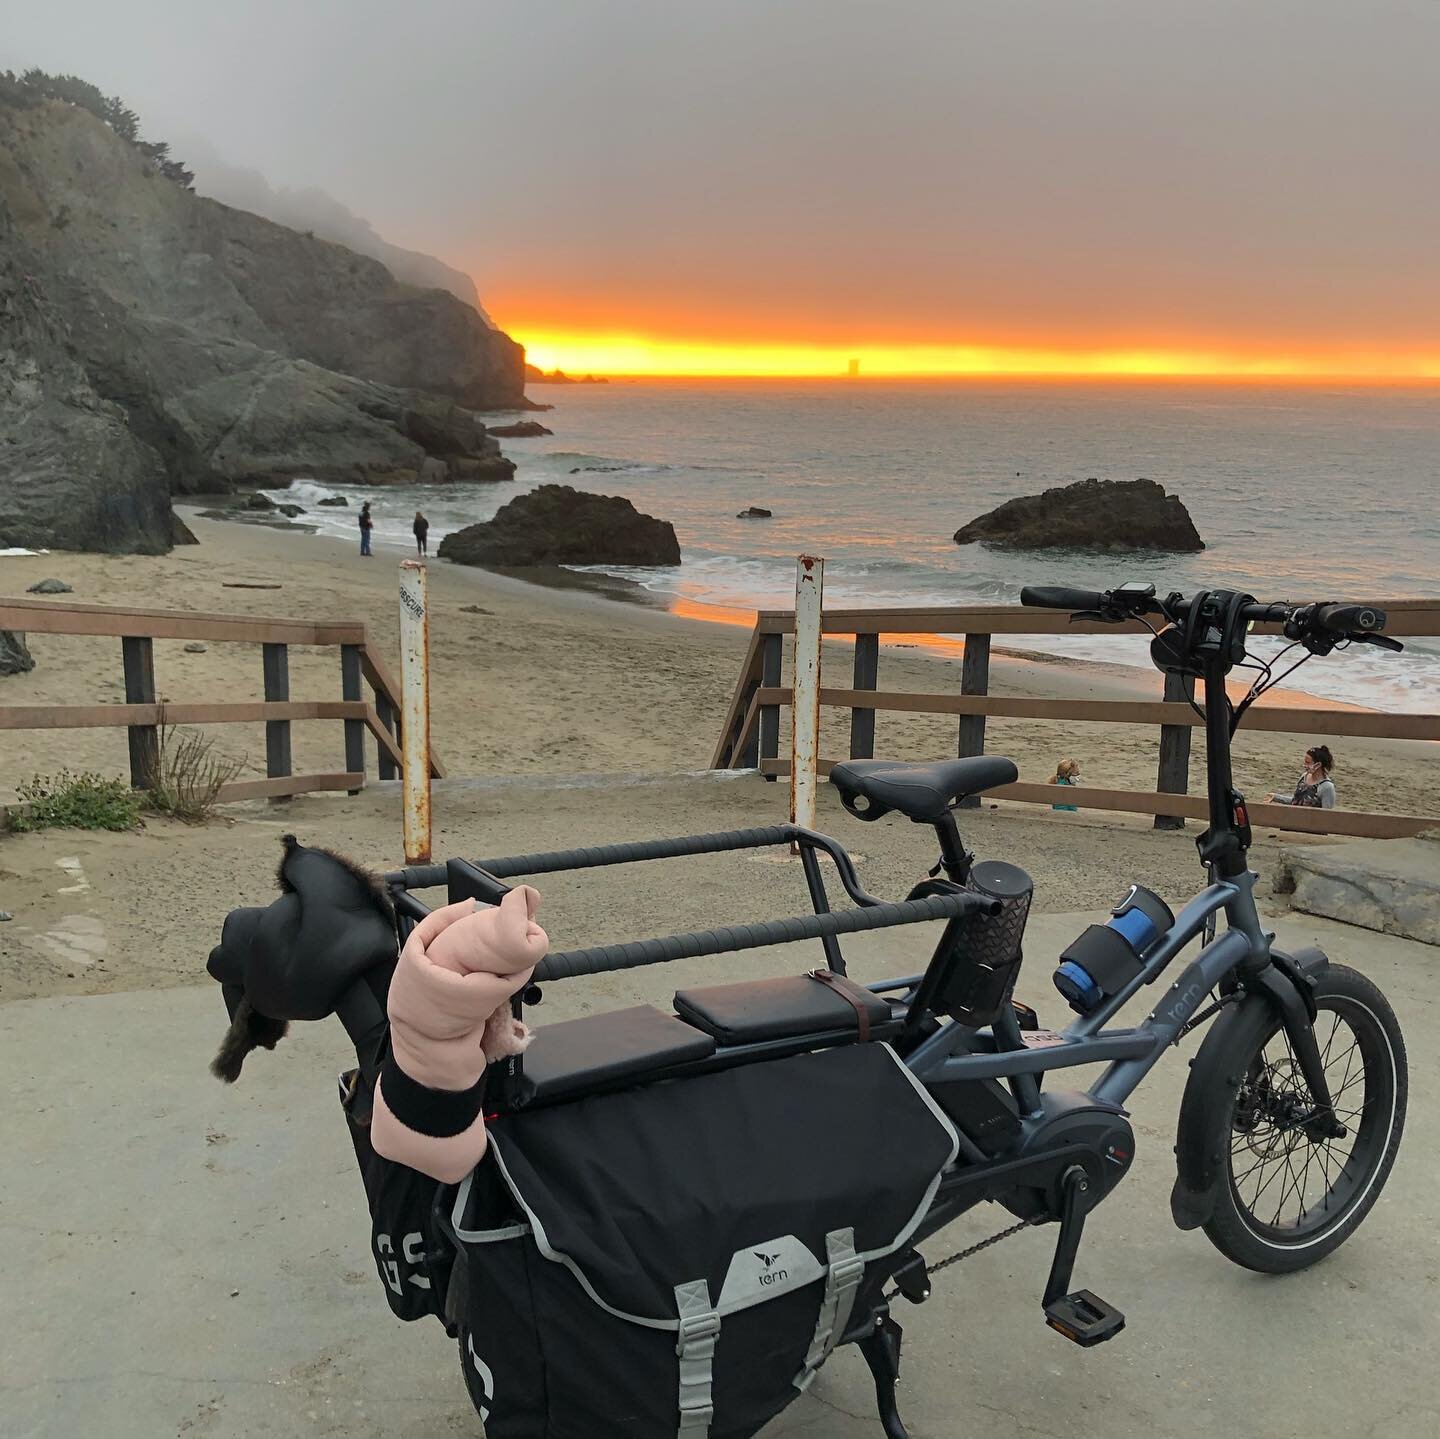 We went on an epic family bike ride to the beach. And in our family, that means we only took 1 bike, our @ternbicycles GSD 😂👍

@bikepretty 

#bicycleadventure #bicycleadventures #cargobike #cargobicycle #bicycleride #bicycleriding #bicycleexplorati